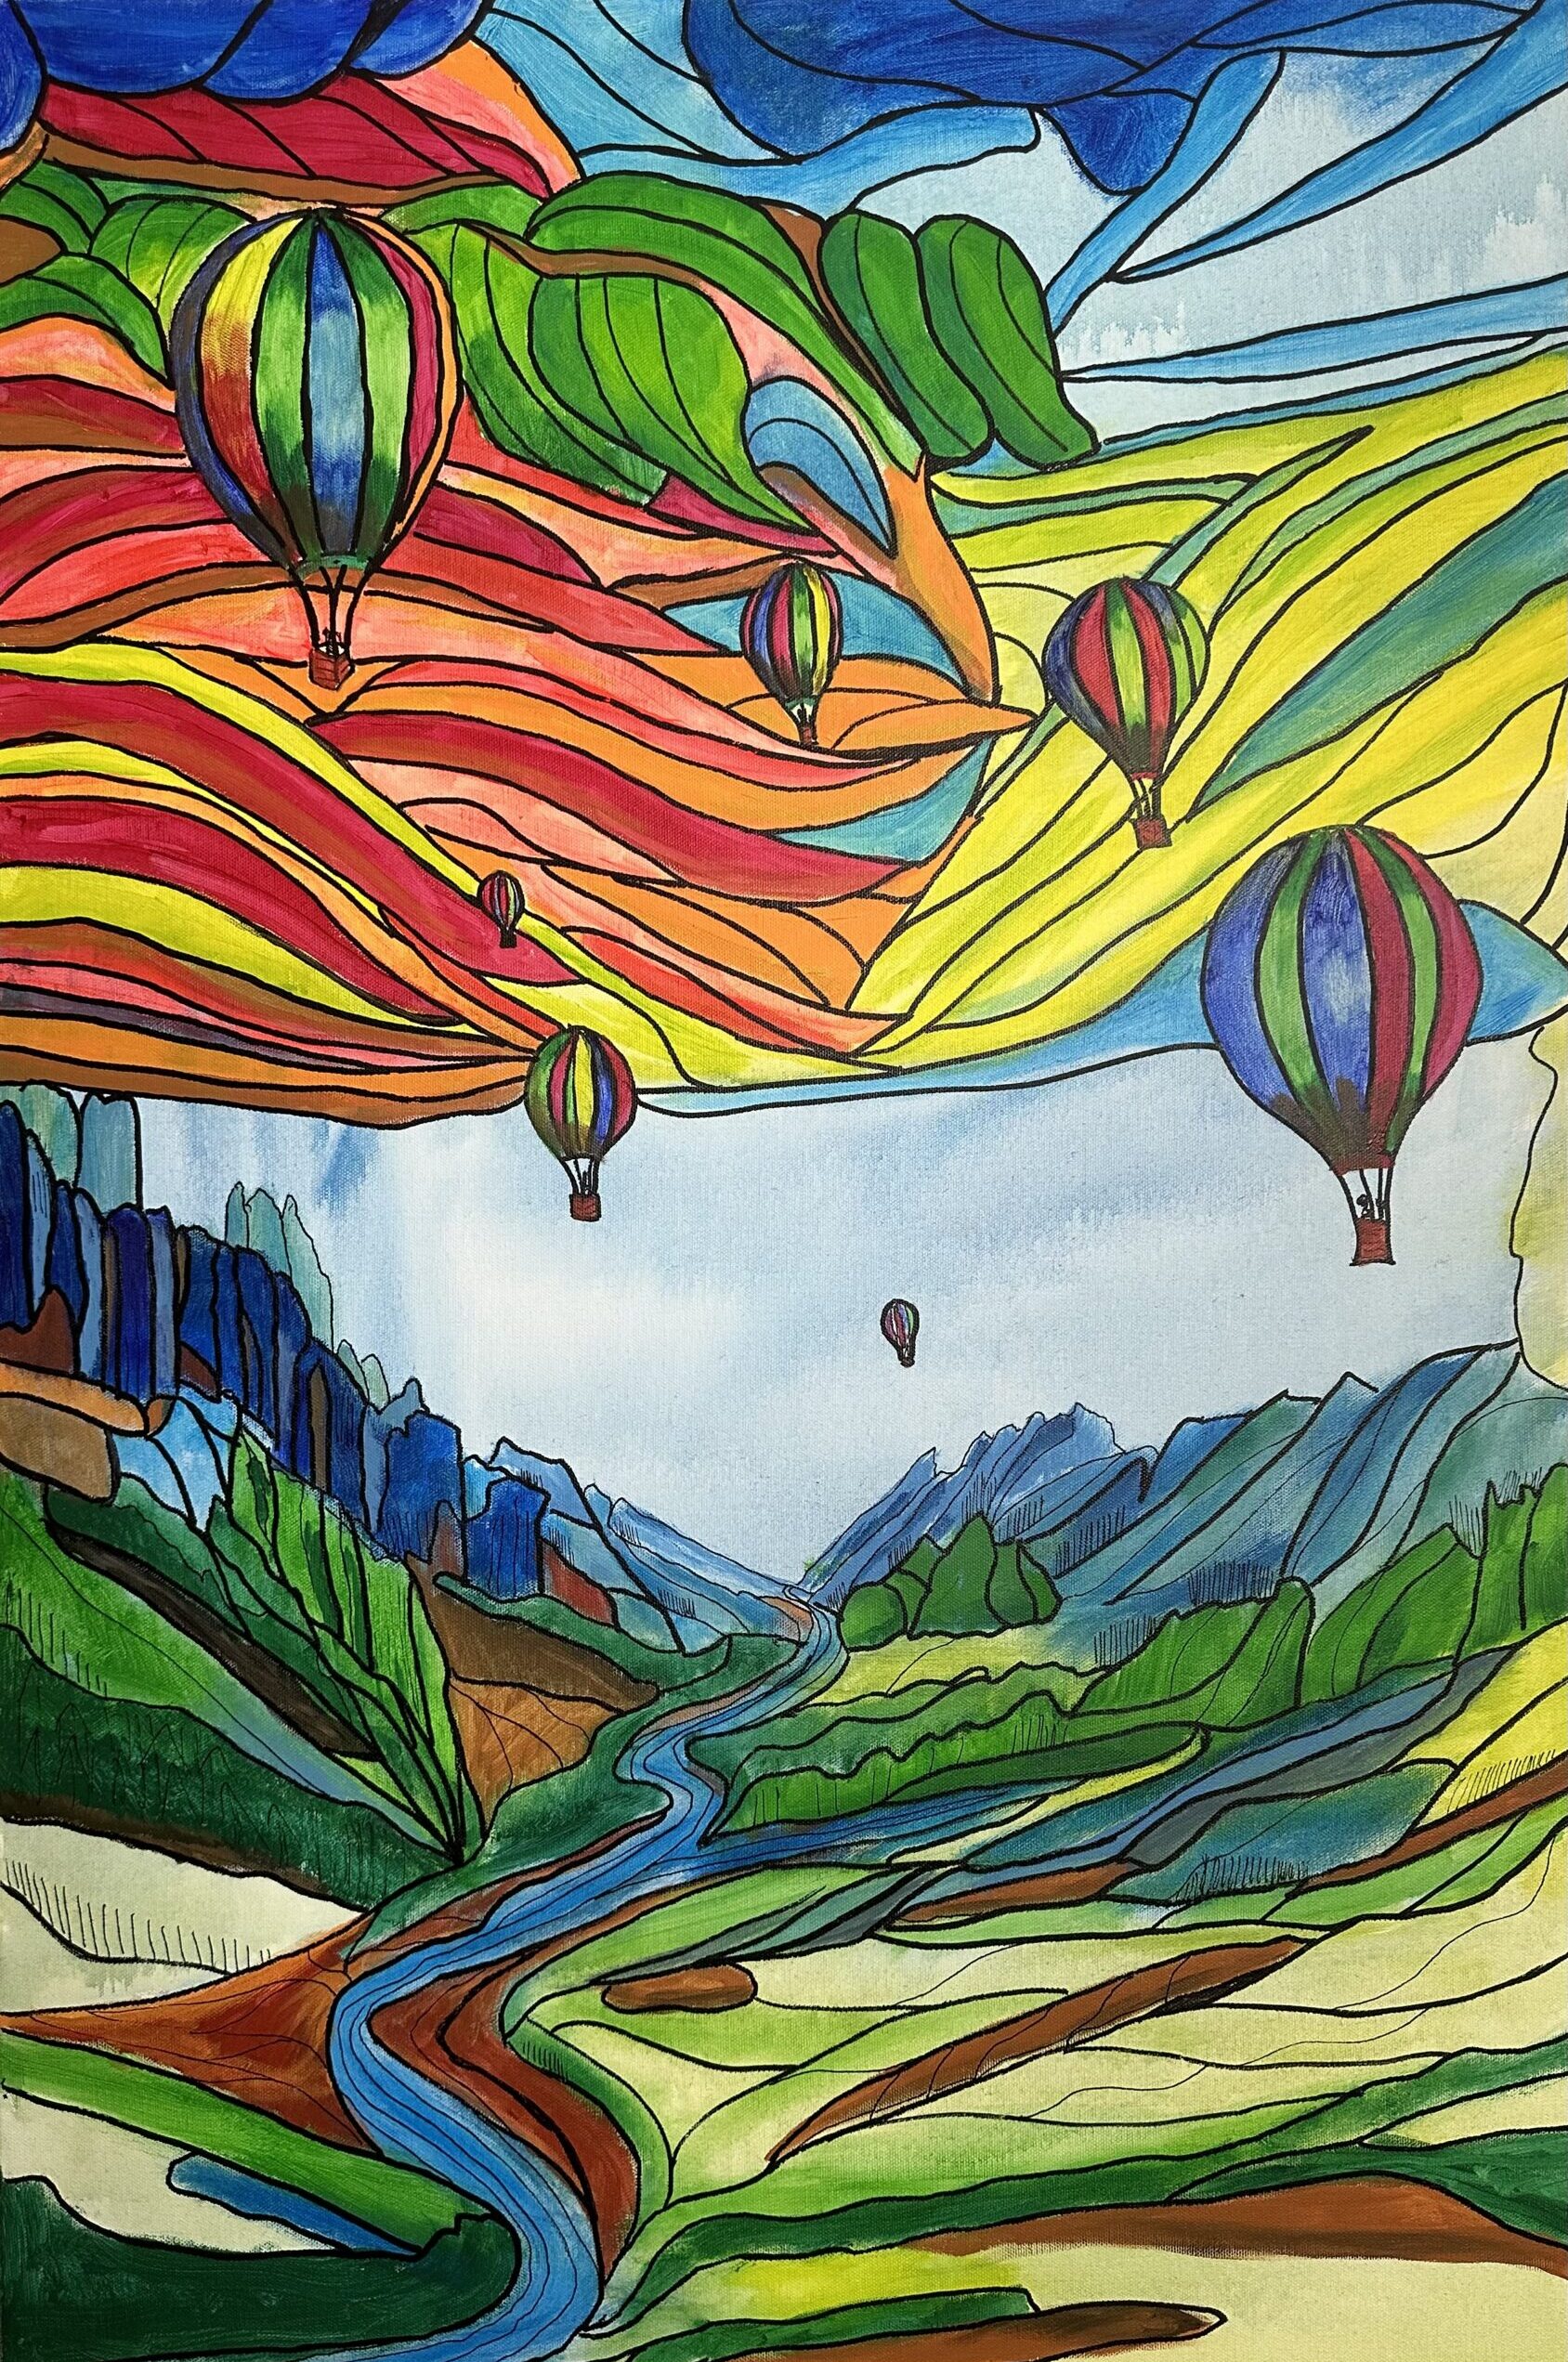 "Ascending Dreams" captures the whimsical journey of hot air balloons drifting over a vibrant landscape. With sweeping curves and bold colors, this acrylic painting on canvas immerses viewers in a dreamlike aerial adventure. The detailed interplay of natural elements and floating balloons conveys a sense of freedom and exploration, making it a captivating piece for any space. Available at $1,500, this artwork brings a touch of wanderlust and joy to your collection.